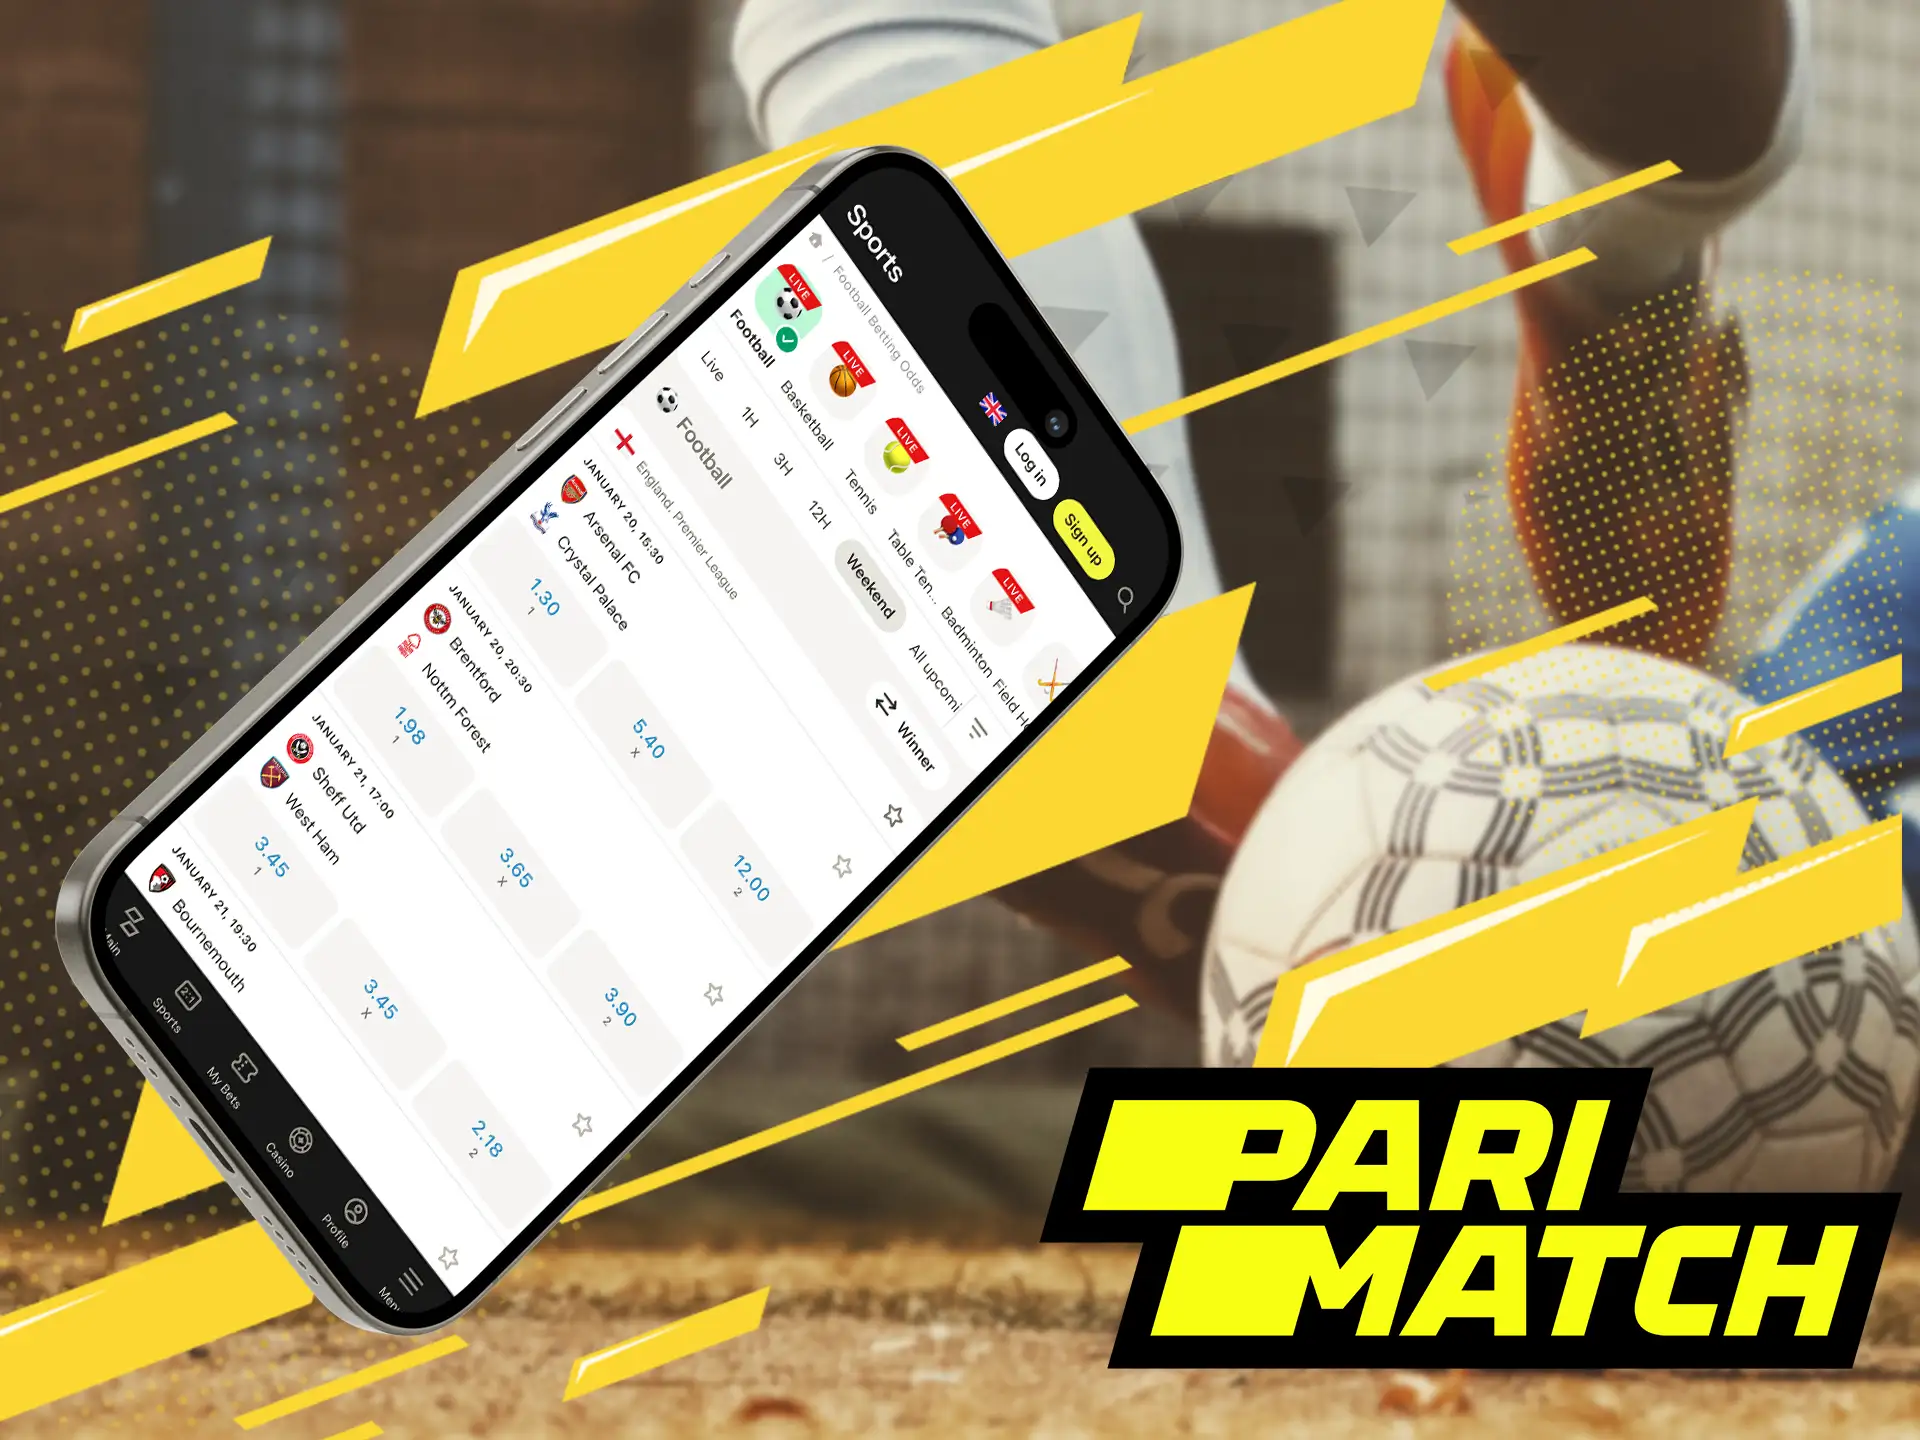 Try Parimatch, a legally operating bookmaker for online football betting in India and licensed by Curacao.